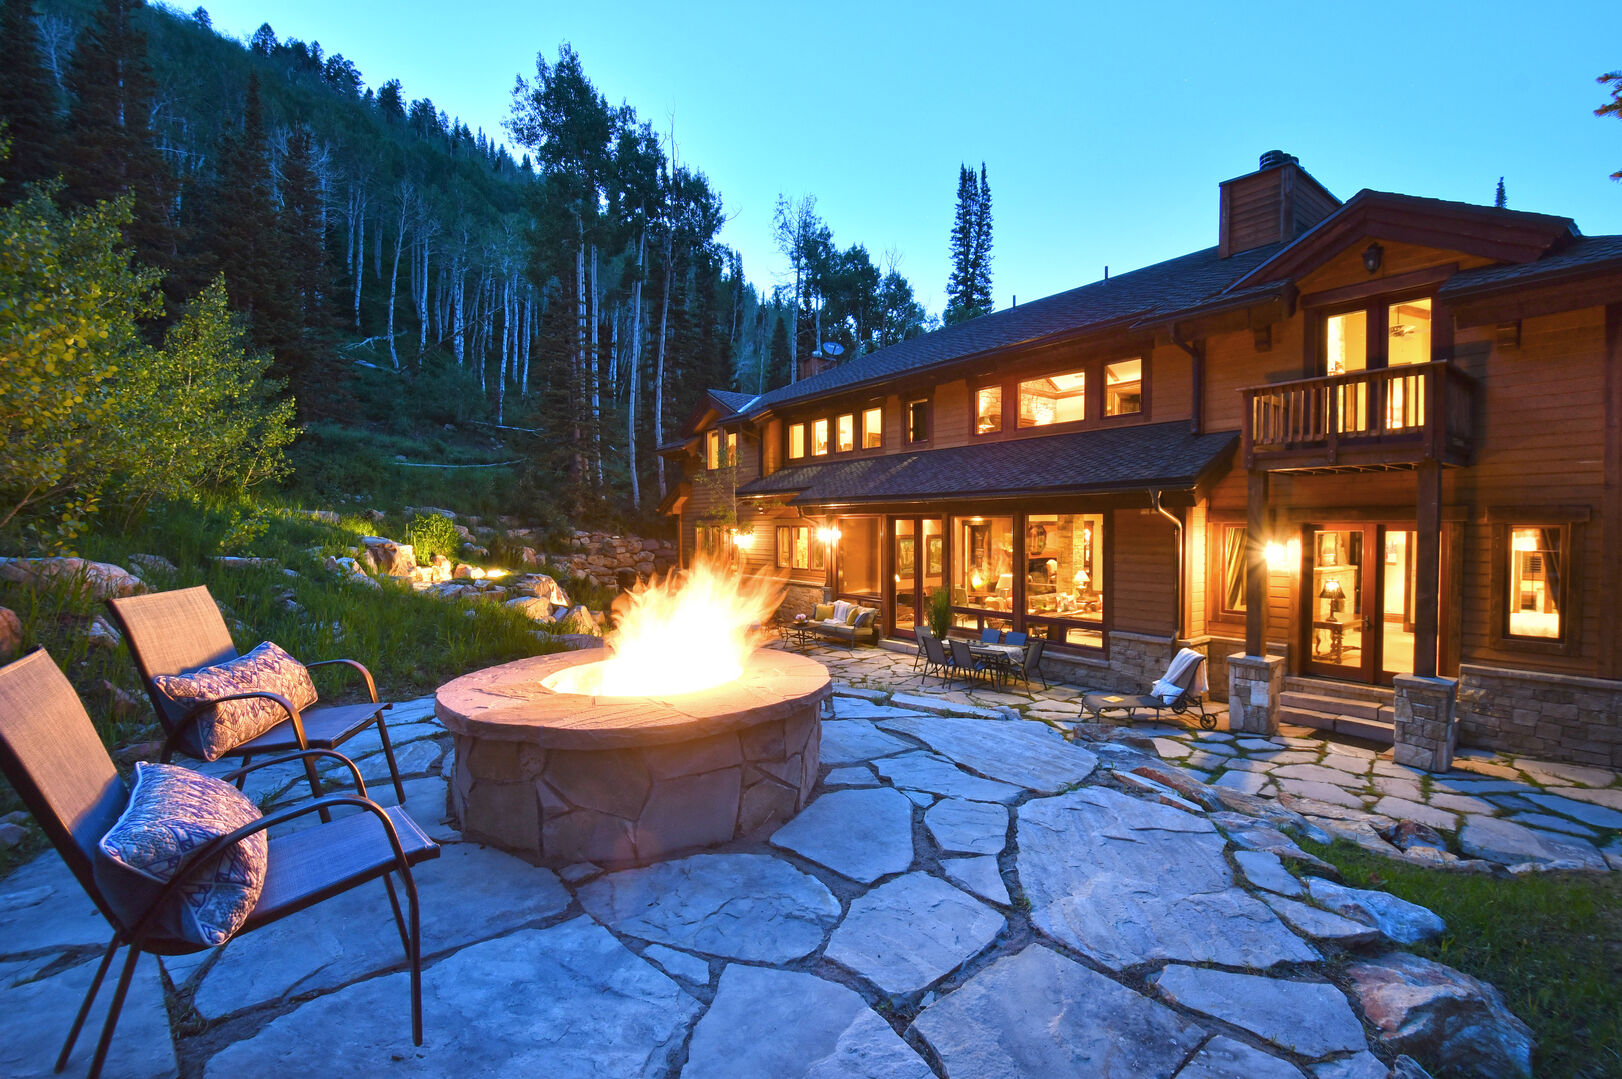 Harmonious Glory - One of our Luxury Vacation Rentals in Park City